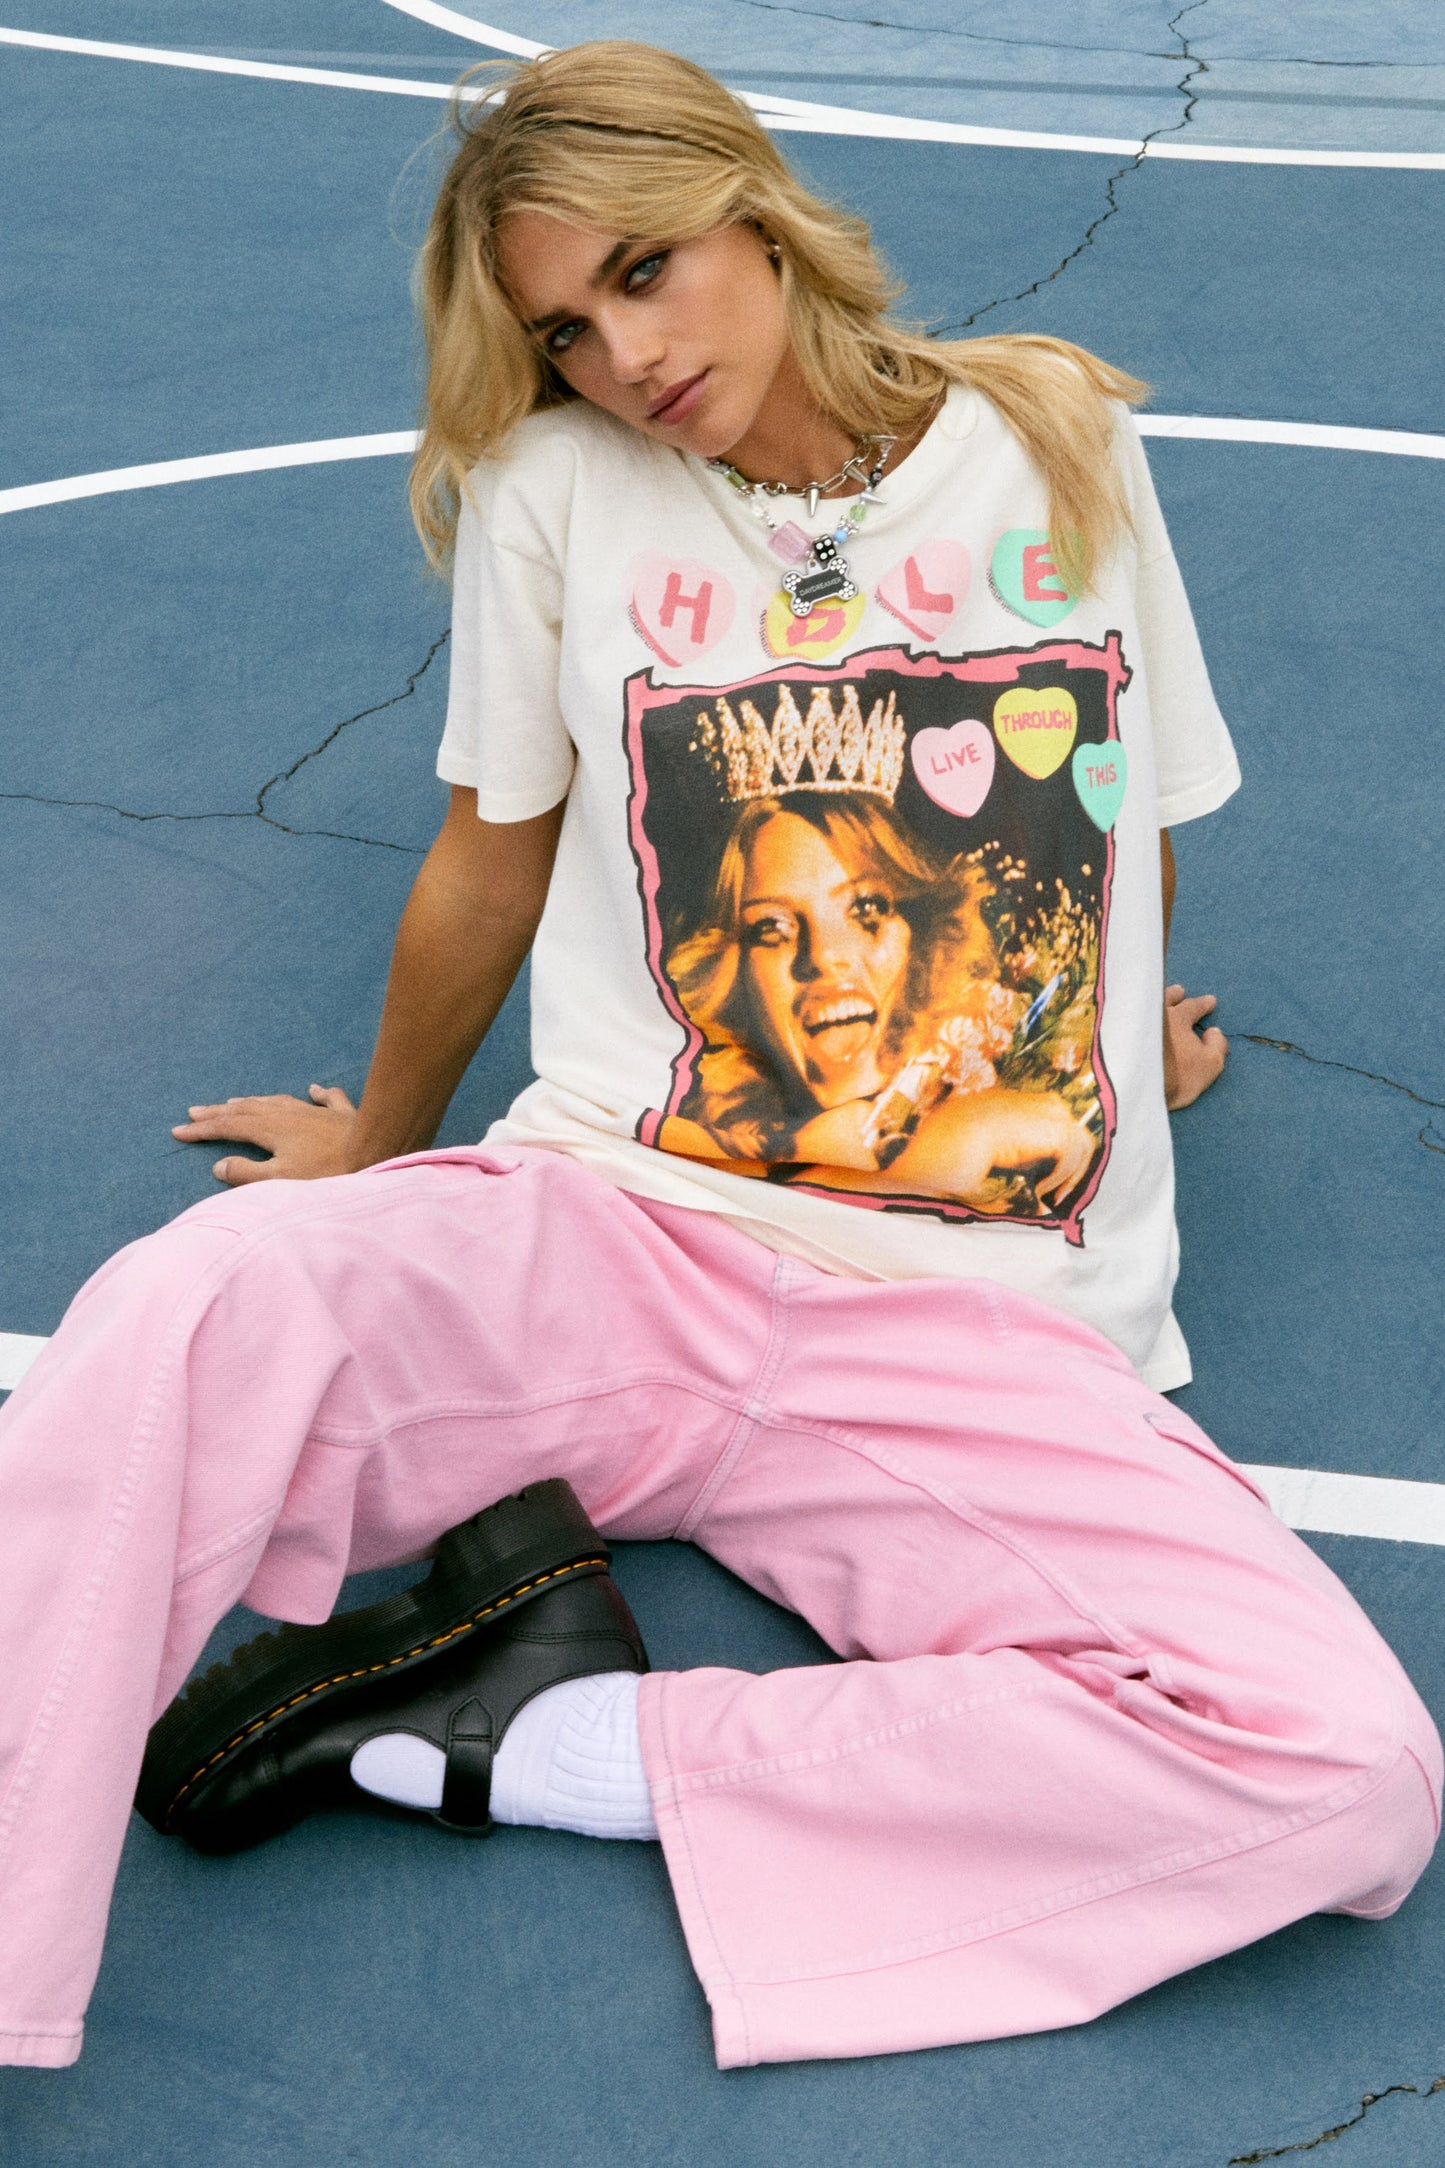 Blonde hair model in 90s Hole merch tee with grungy, poster style designed with the original artwork from Hole’s second studio album “Live Through This.” The tour details stamped along the back.